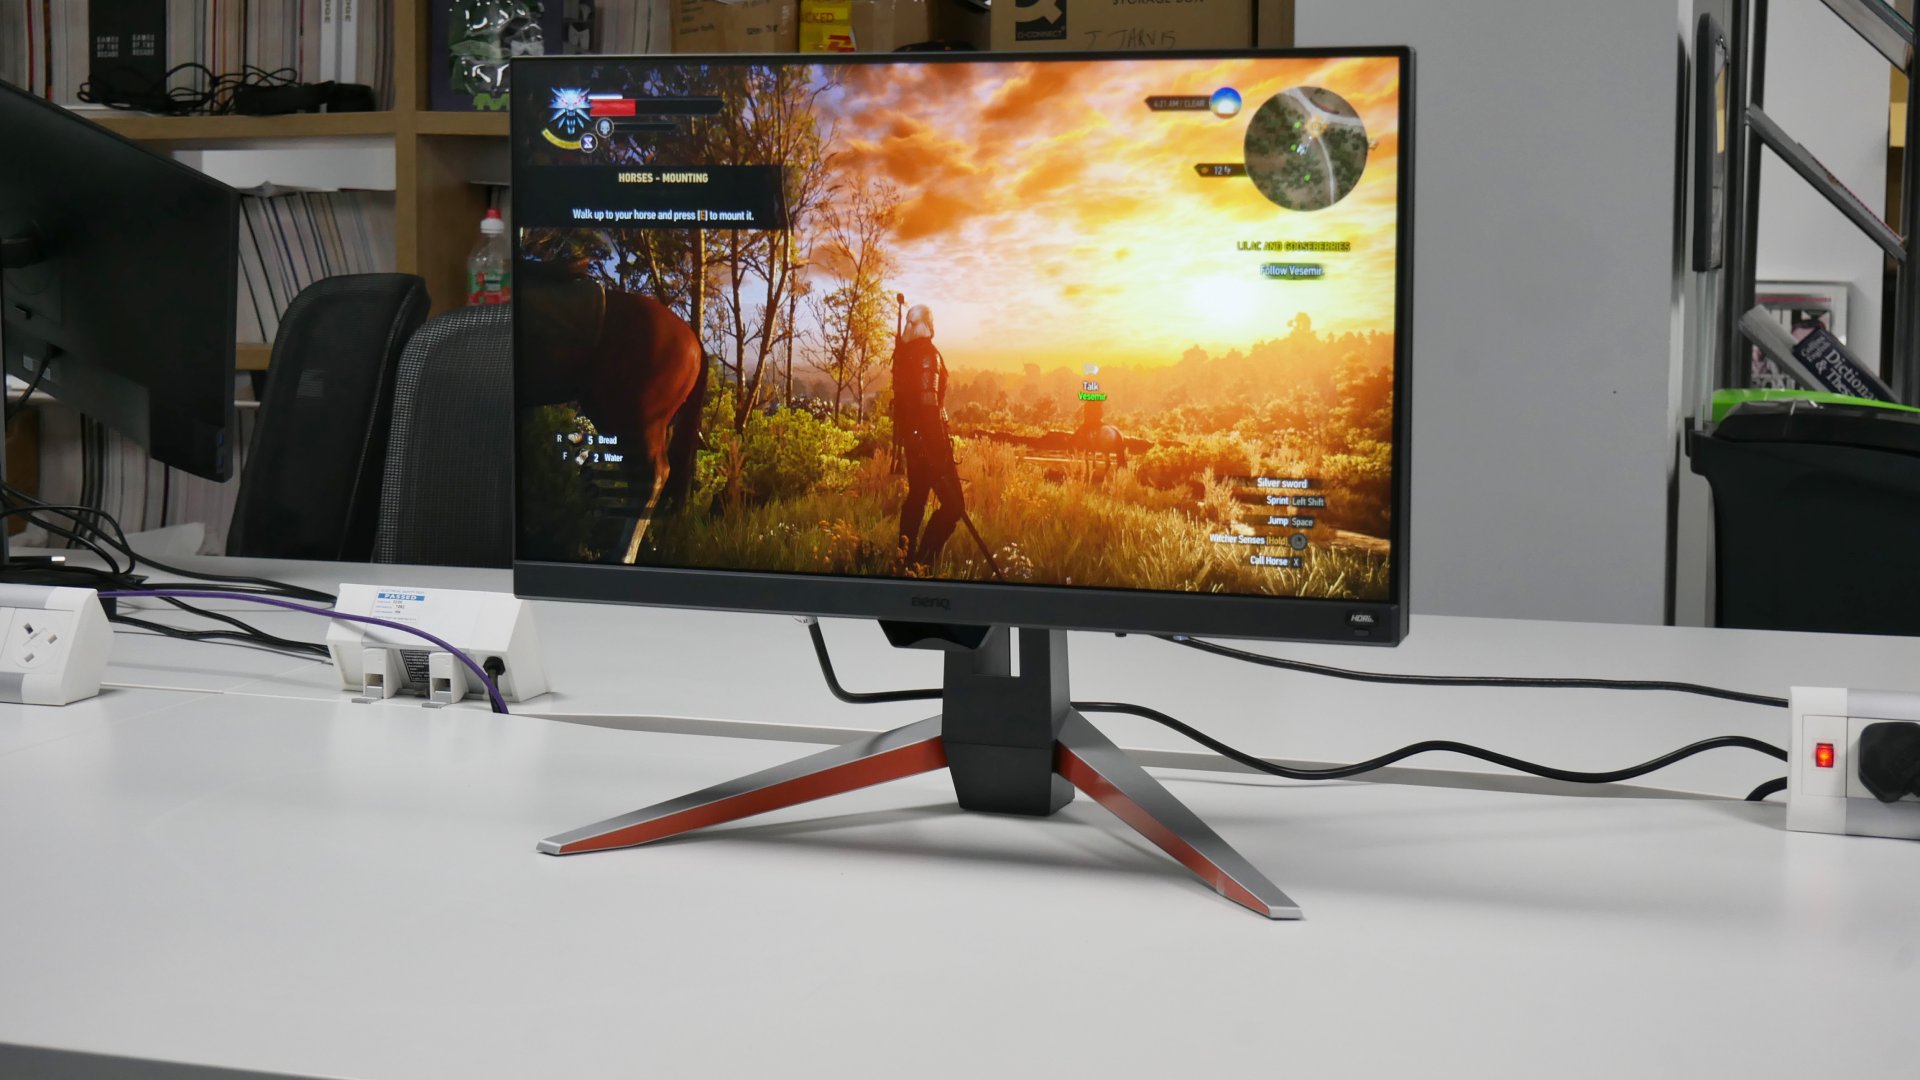 BenQ Mobiuz OLED Gaming Monitor Review: Just Too Much